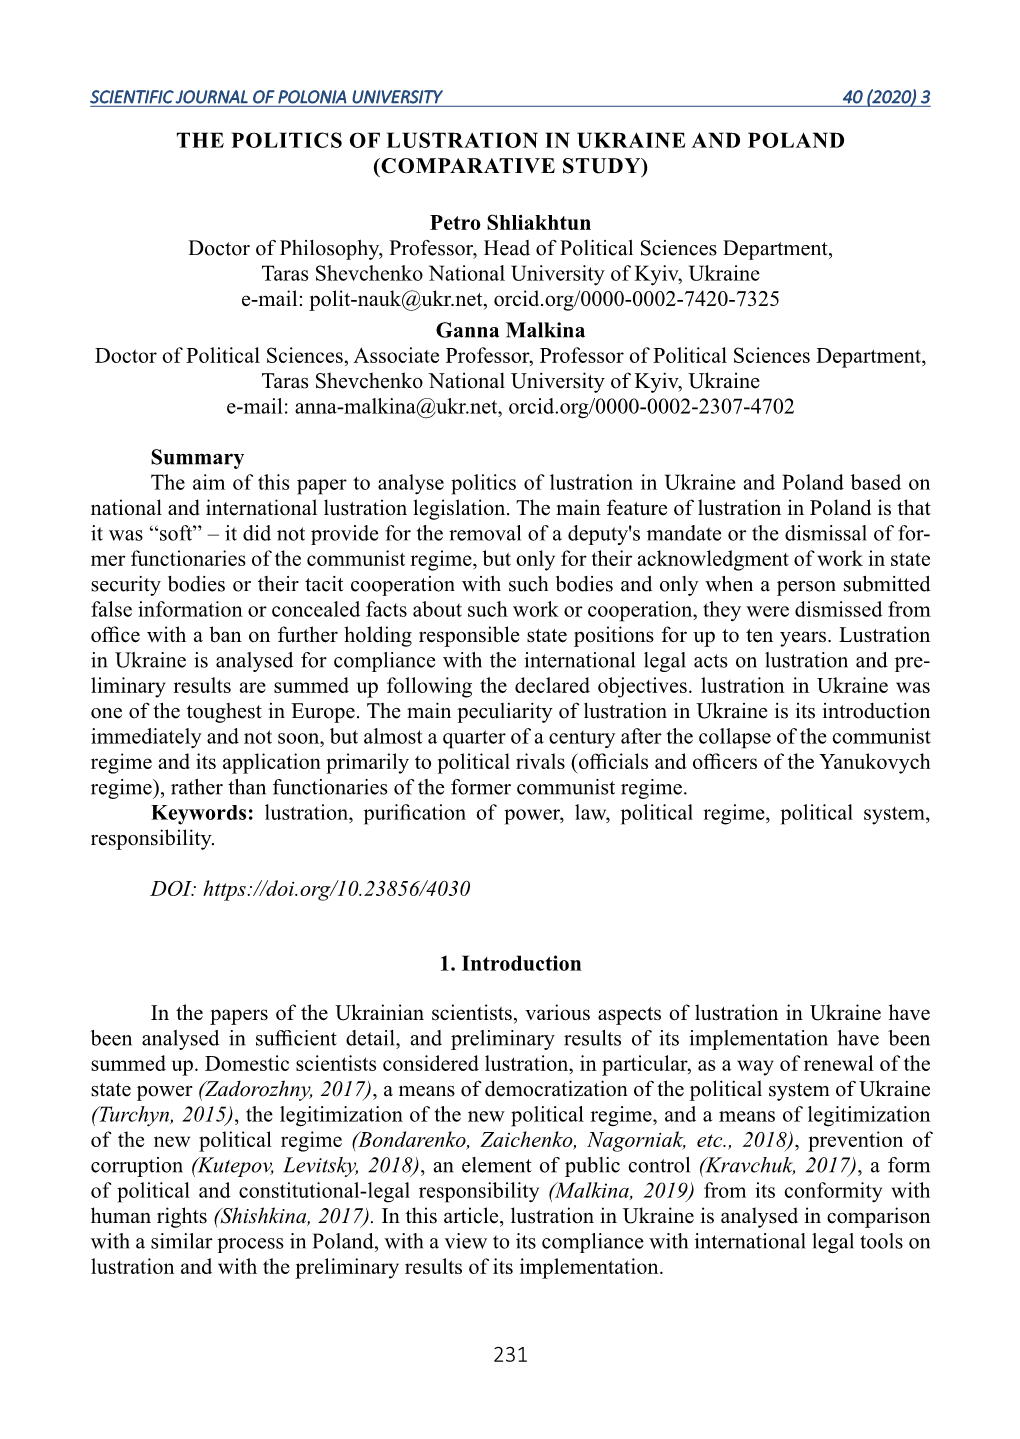 The Politics of Lustration in Ukraine and Poland (Comparative Study)